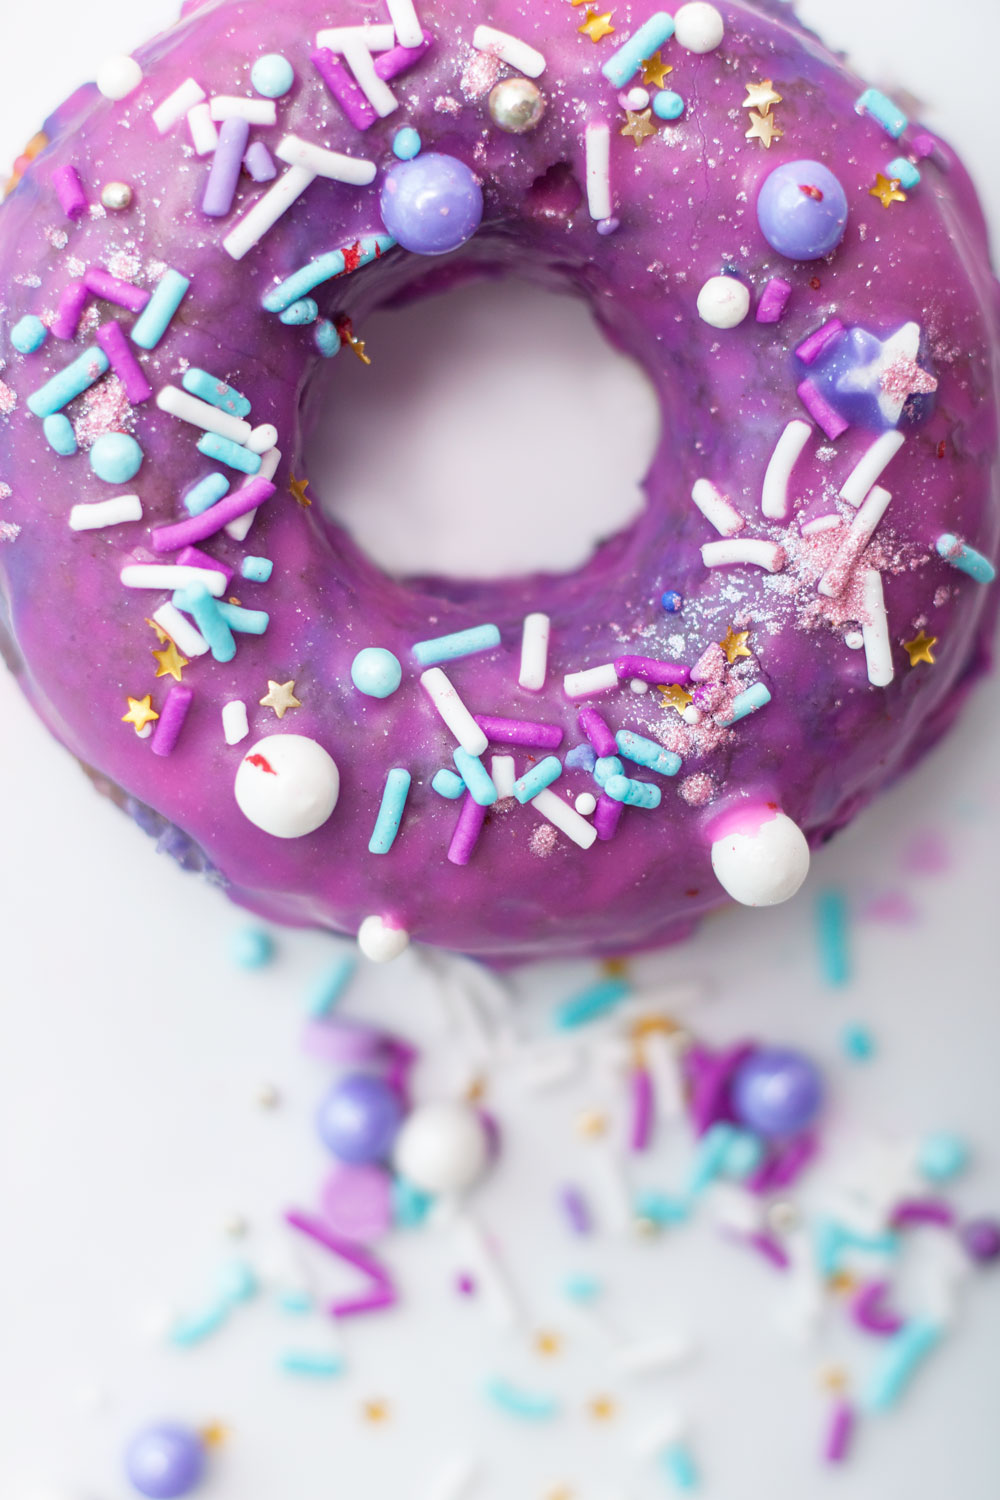 Sparkling sprinkles with pink and purple glaze, these Unicorn Sprinkle Doughnuts are perfect for National Doughnut Day (which is every day, obviously).